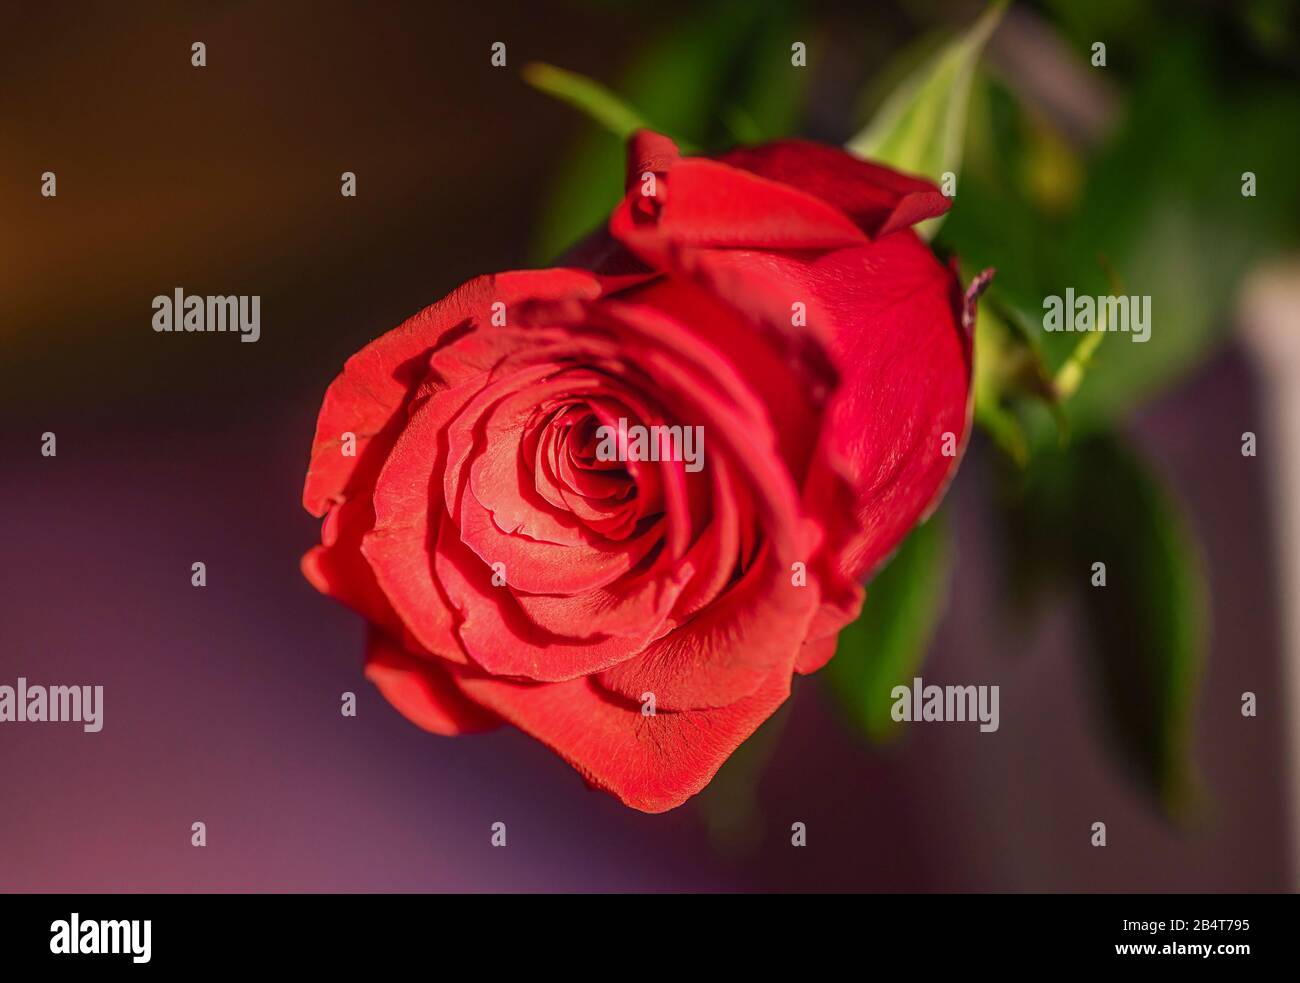 Close up of a red rose flower. Rose petals. Stock Photo